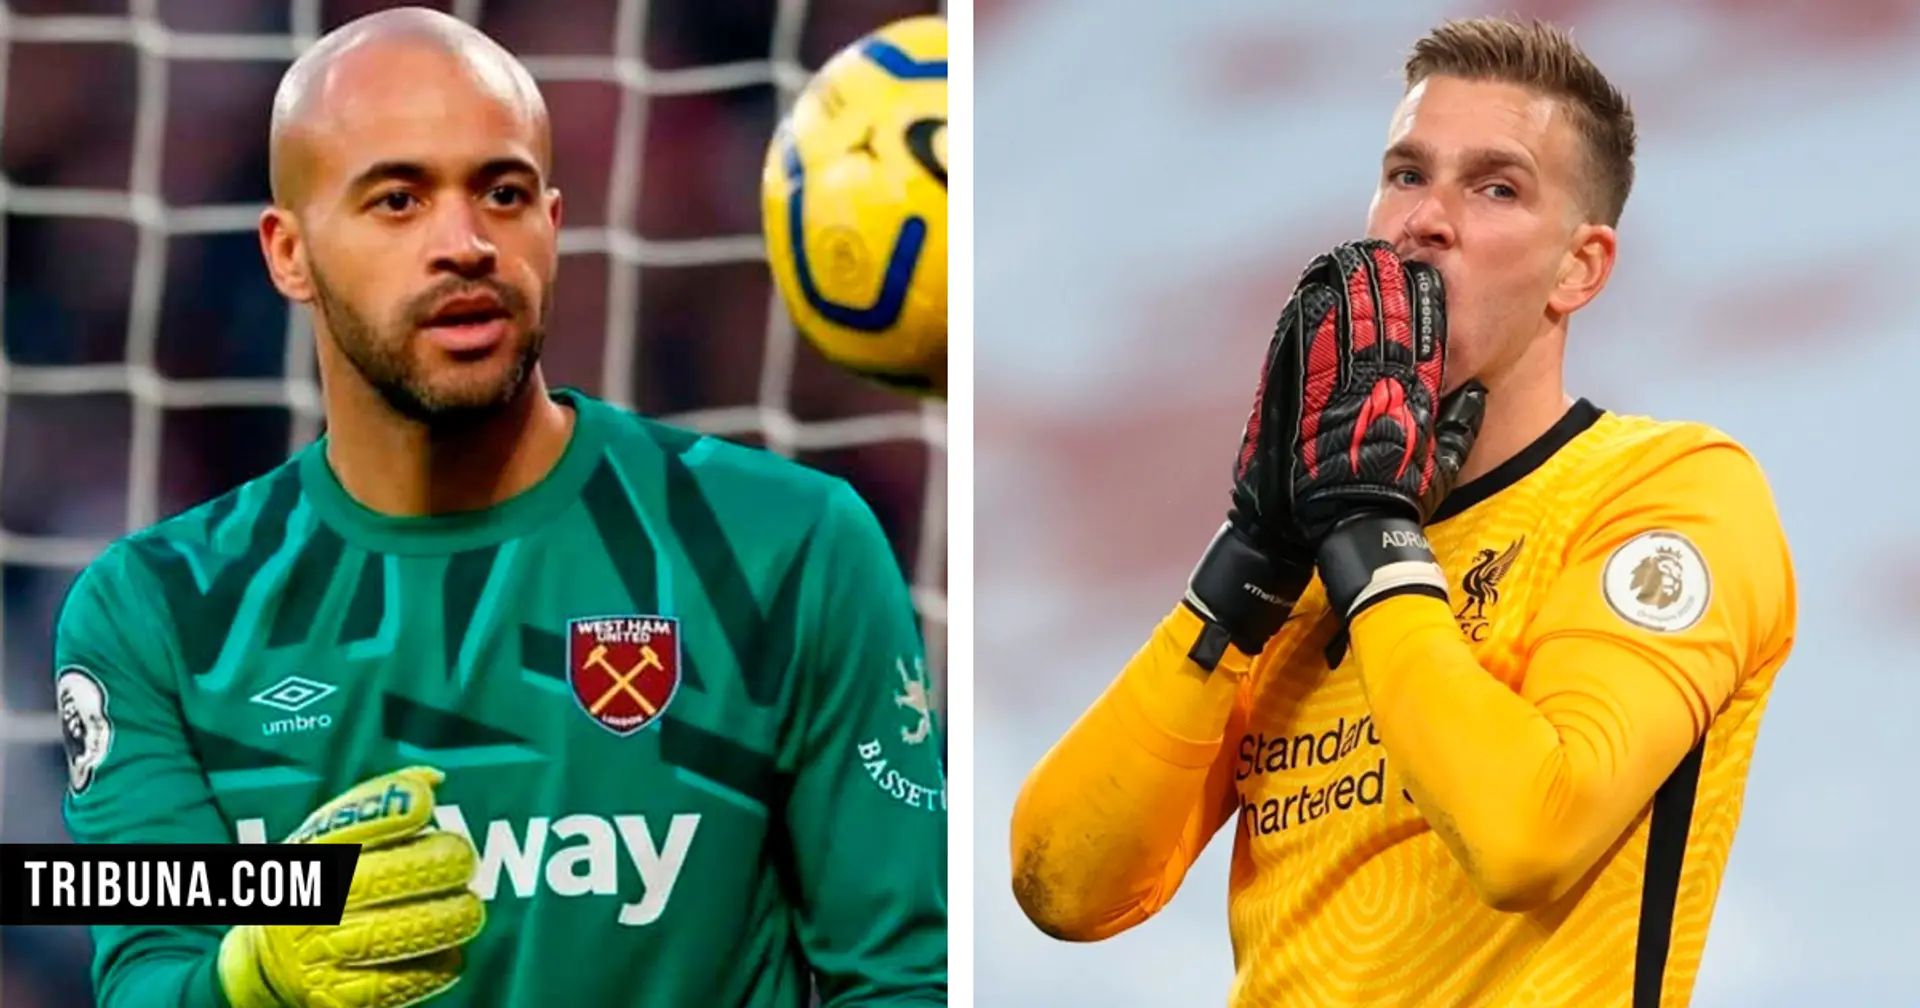 'Opinions don’t pay the bills': Former West Ham teammate sends message of support to Adrian